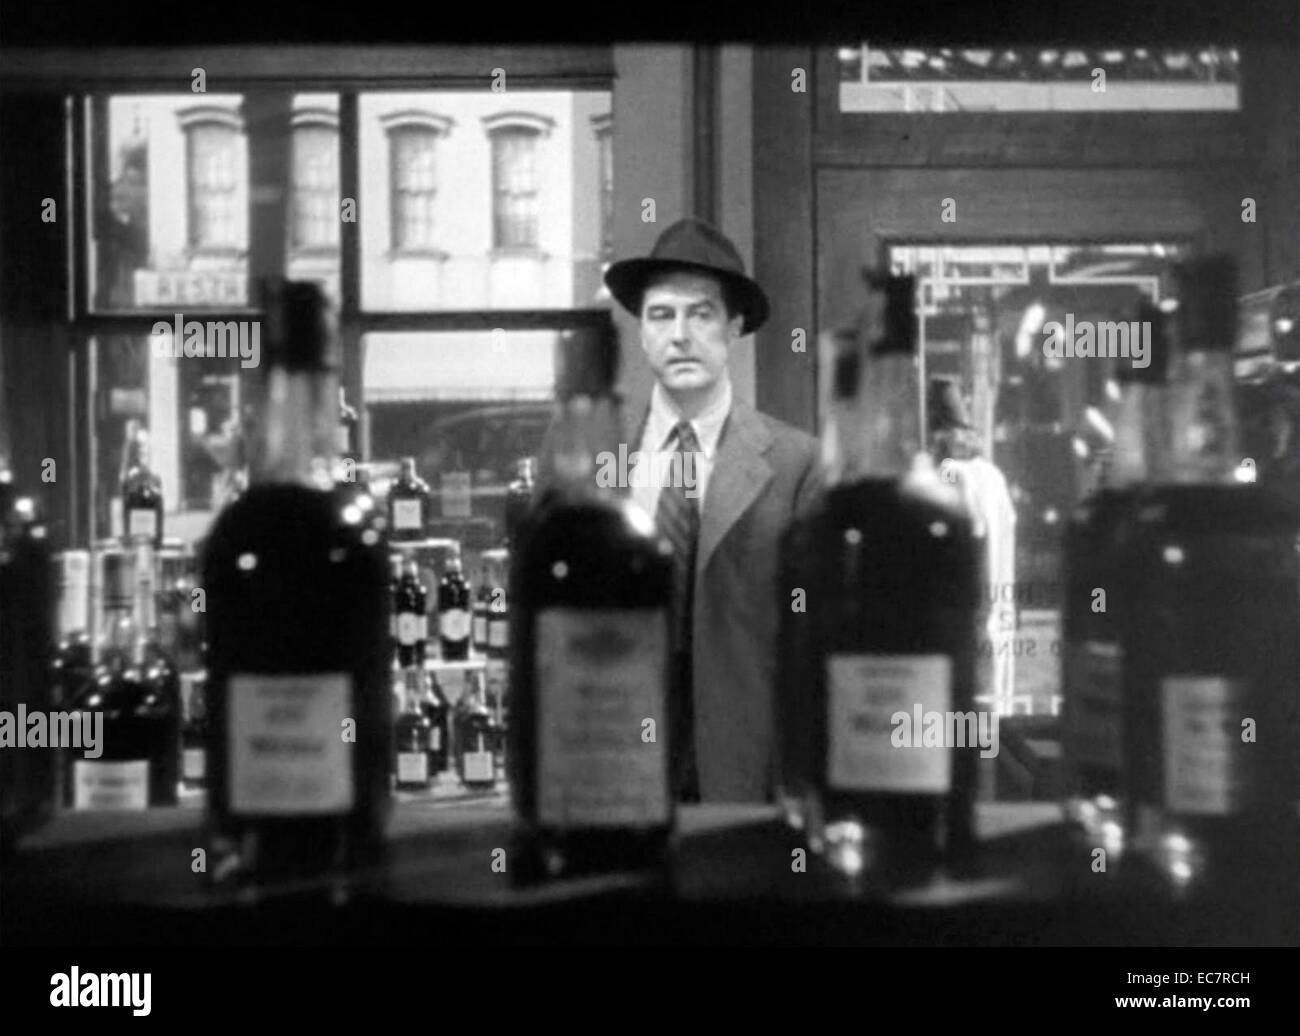 The Lost Weekend is a 1945 American drama film starring Ray Milland and Jane Wyman. Directed by Billy Wilder and based on Charles Jackson's novel of the same name it tells the story of an alcoholic writer. The film appears on The National Film Registry of the Library of Congress. Stock Photo